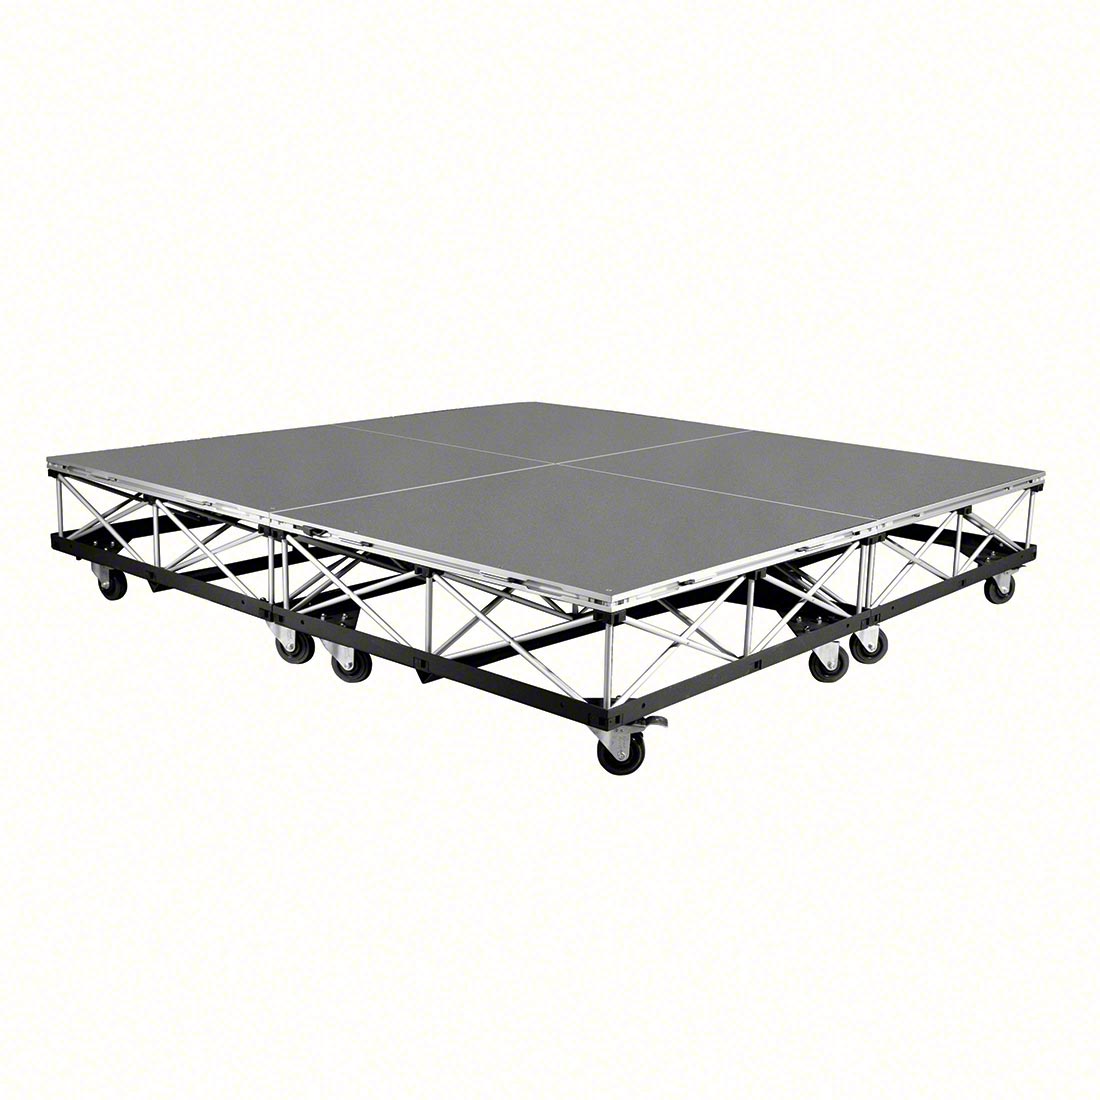 IntelliStage 6'x6' Mobile Drum Riser on Casters, Carpeted